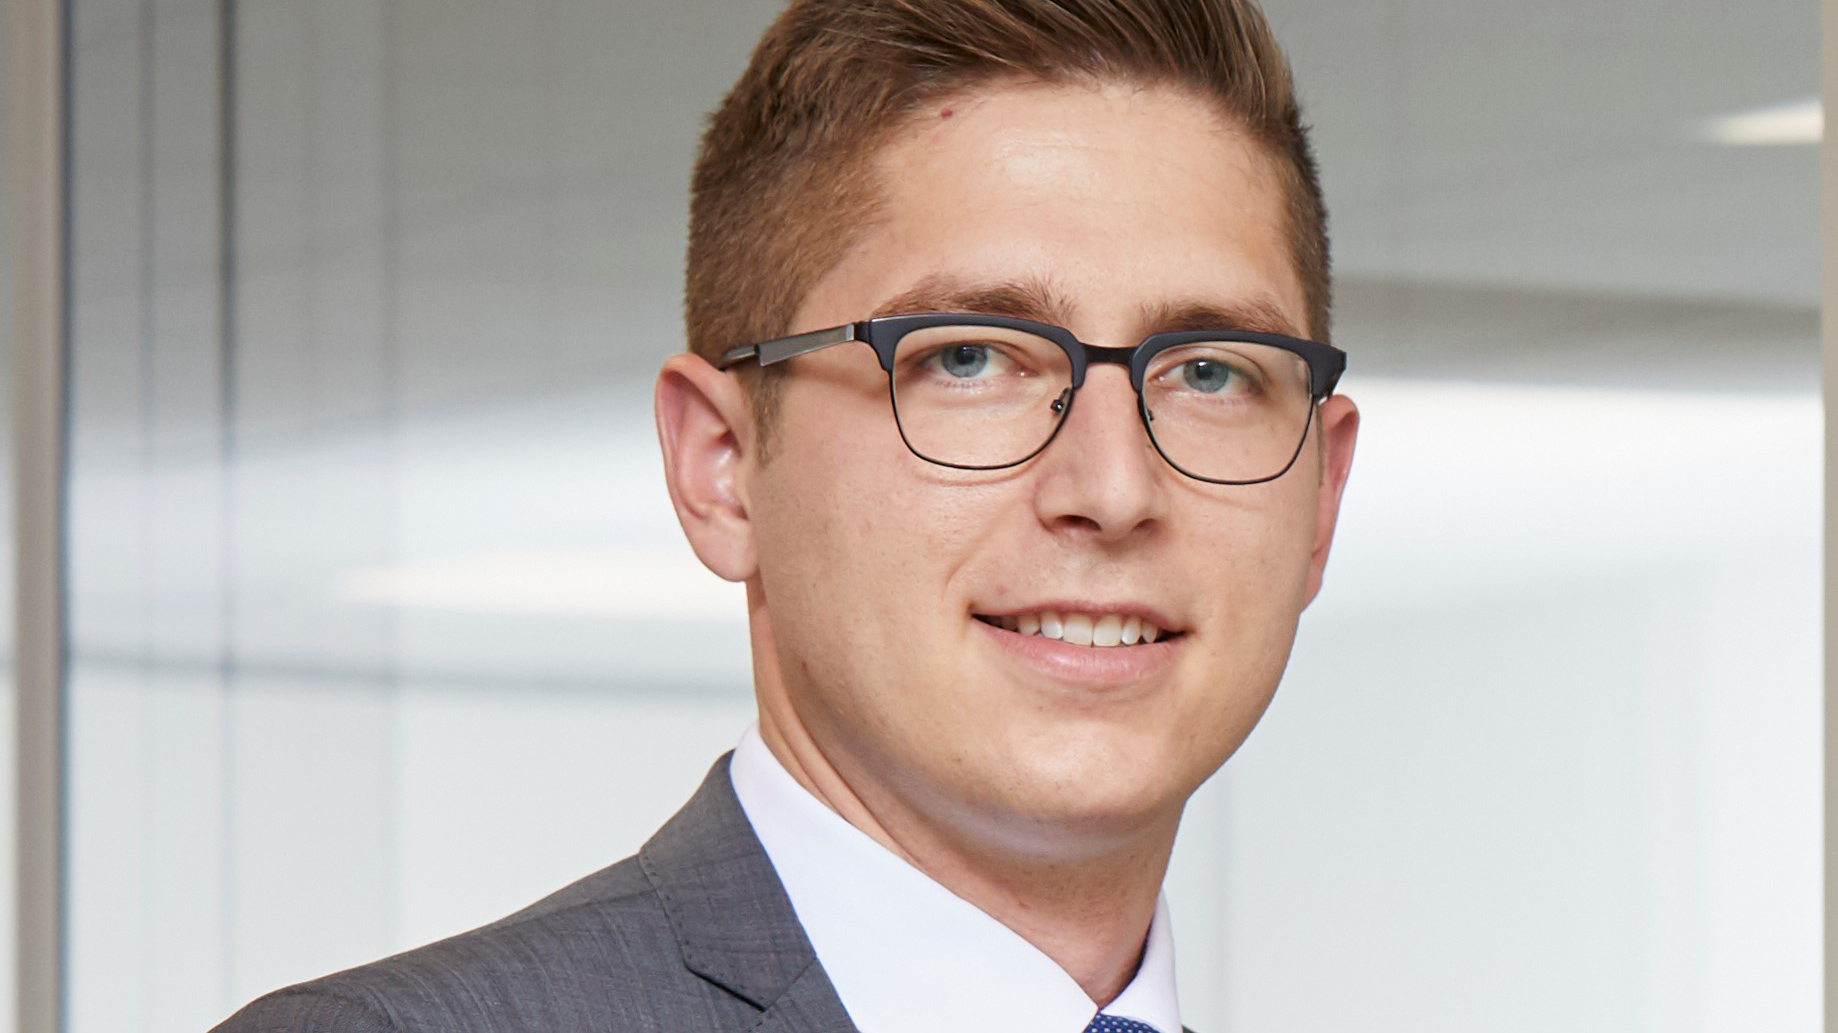 Alexander Wolter, Head of Sales and Product Management Electromobility at BPW